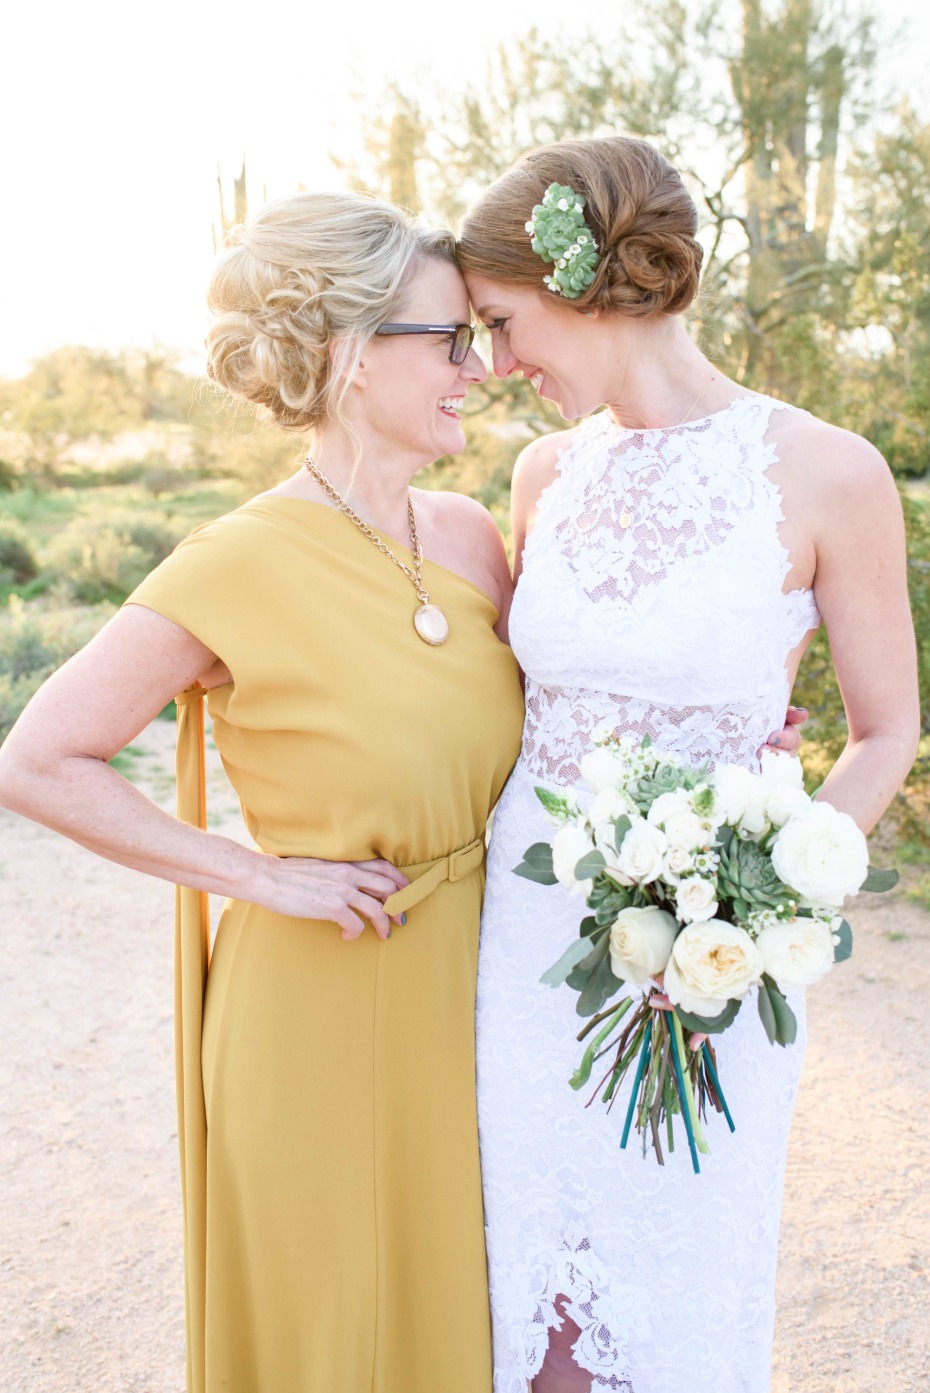 Cute portrait of the mom and the bride